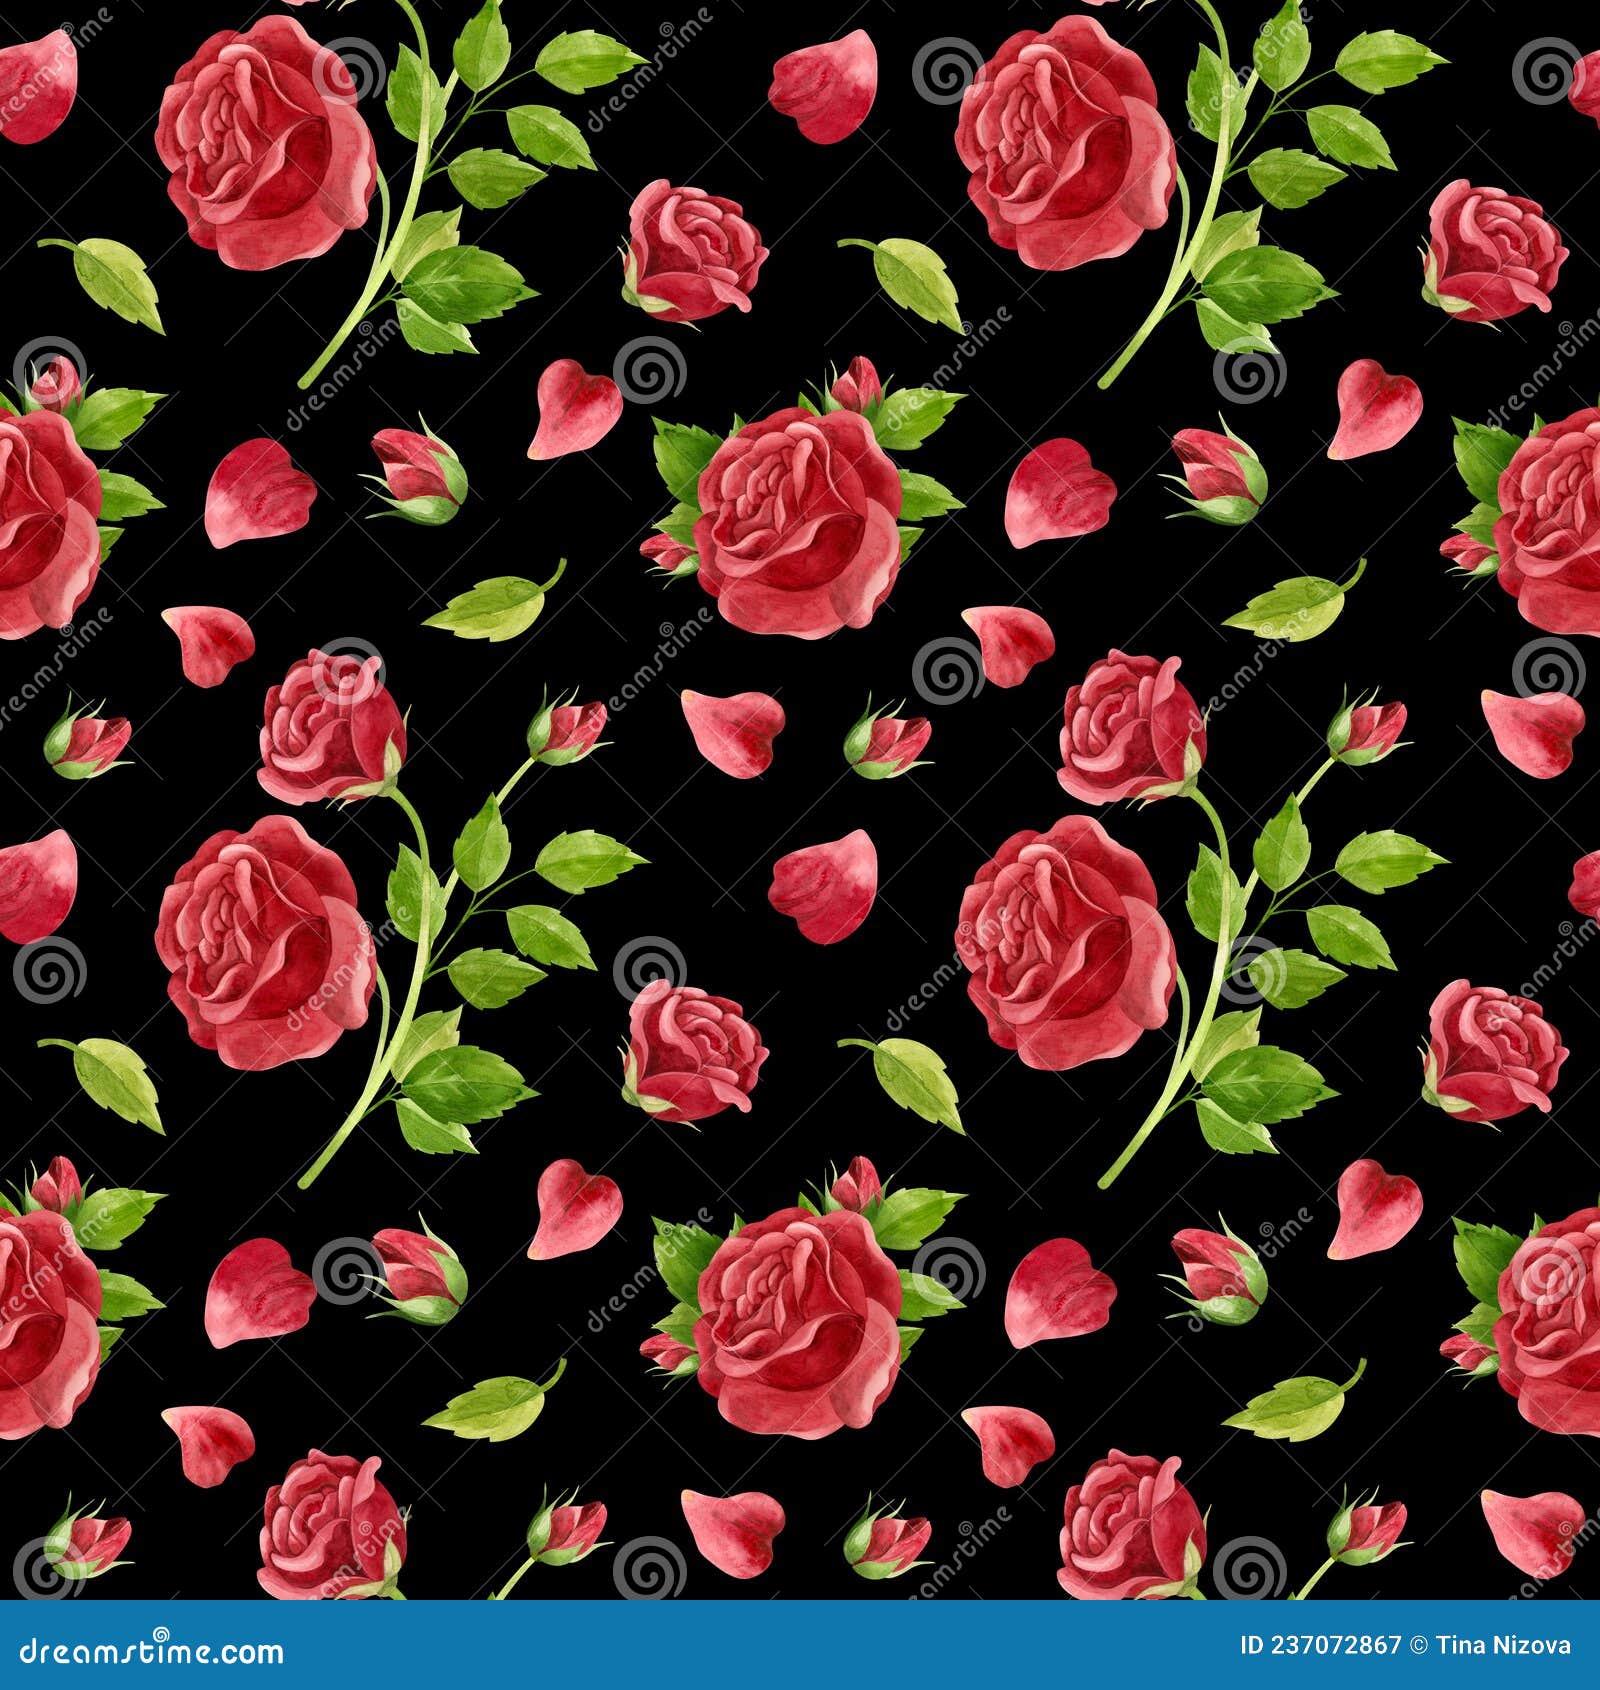 Red Roses Seamless Pattern. Flowers, Buds and Rose Petals Stock ...